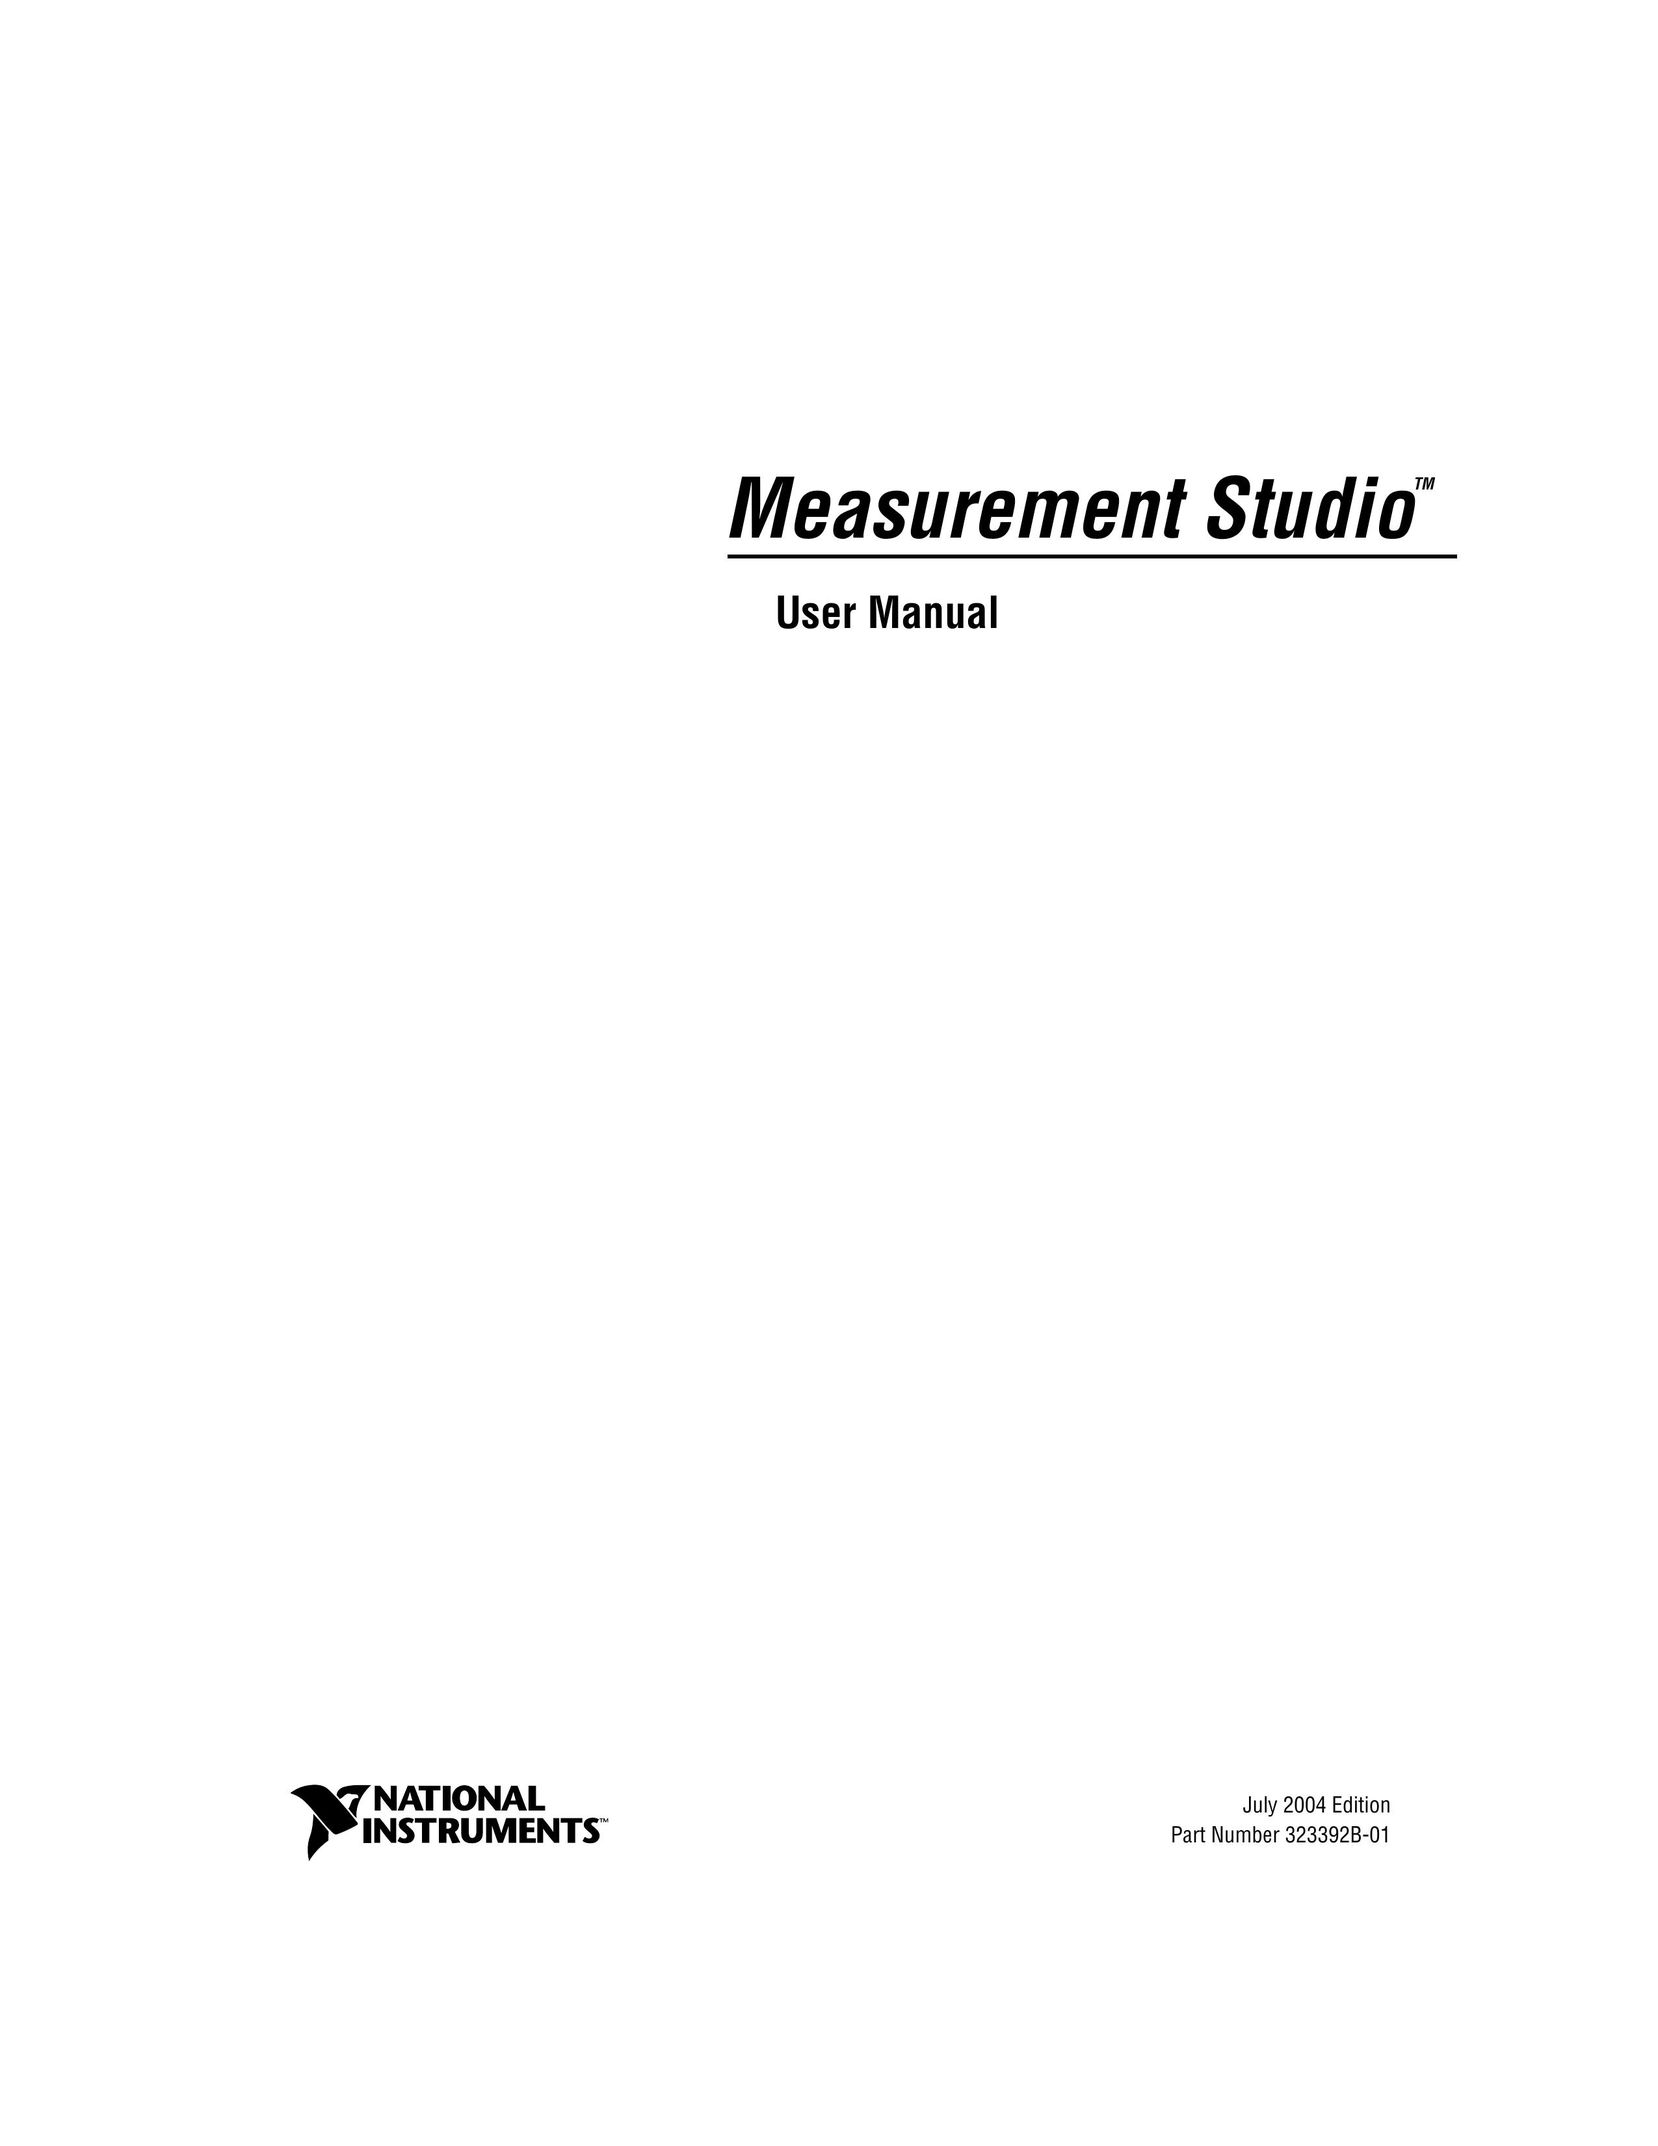 National Instruments Measurement Studio Home Theater System User Manual